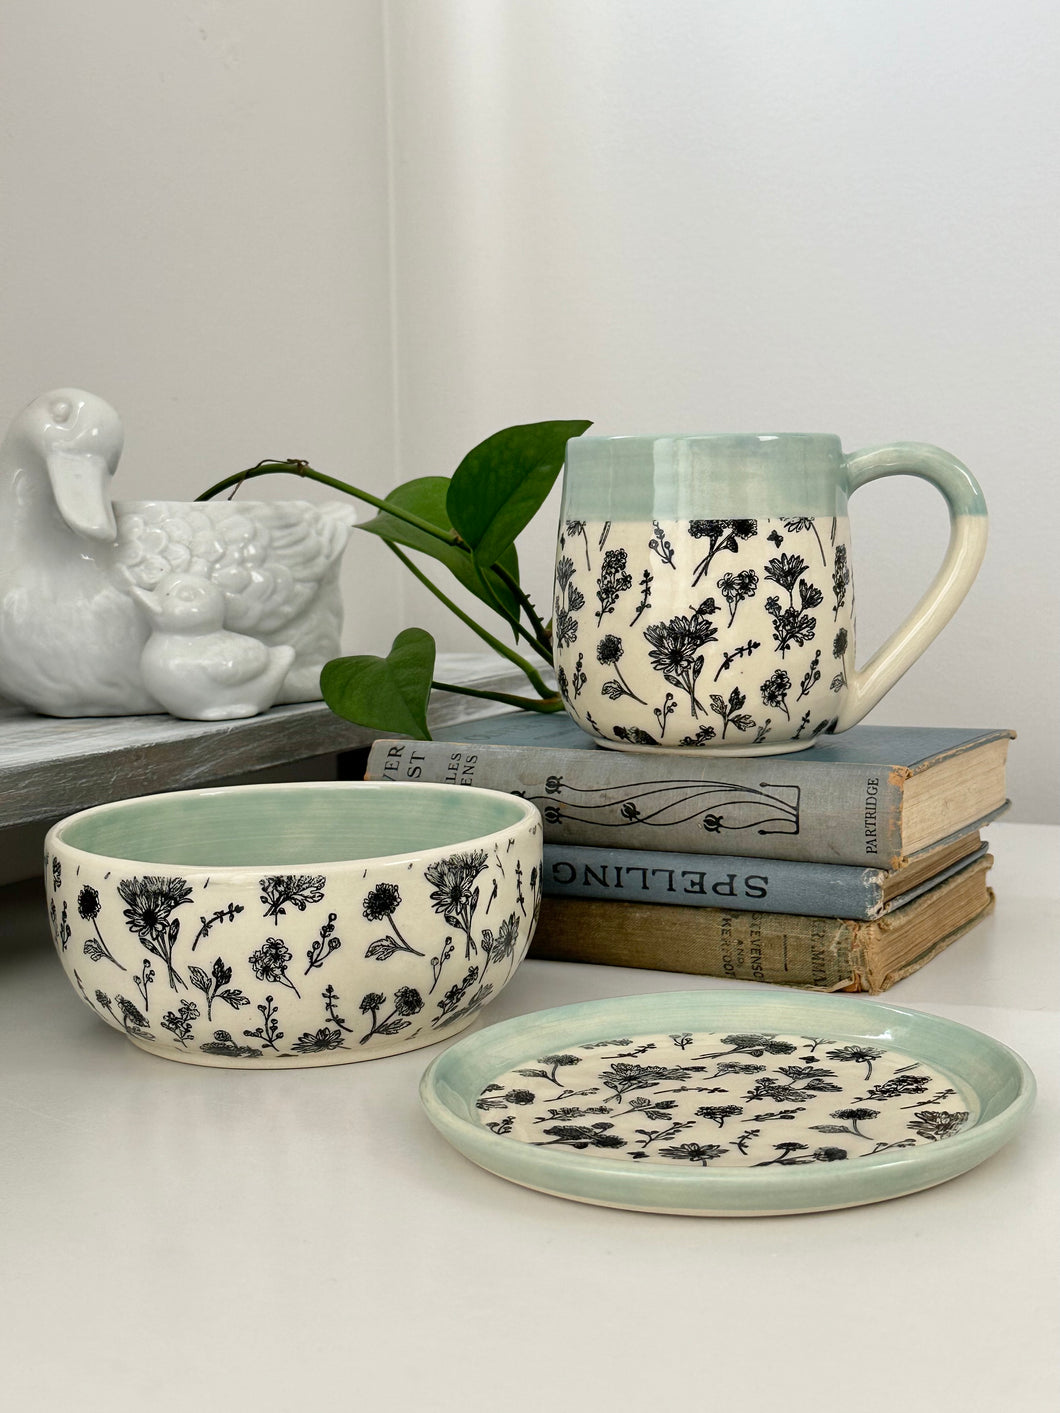 #019 - 3 piece set - Small snack plate, small dessert bowl, and 18 oz. mug with wild flower pattern and aqua rim